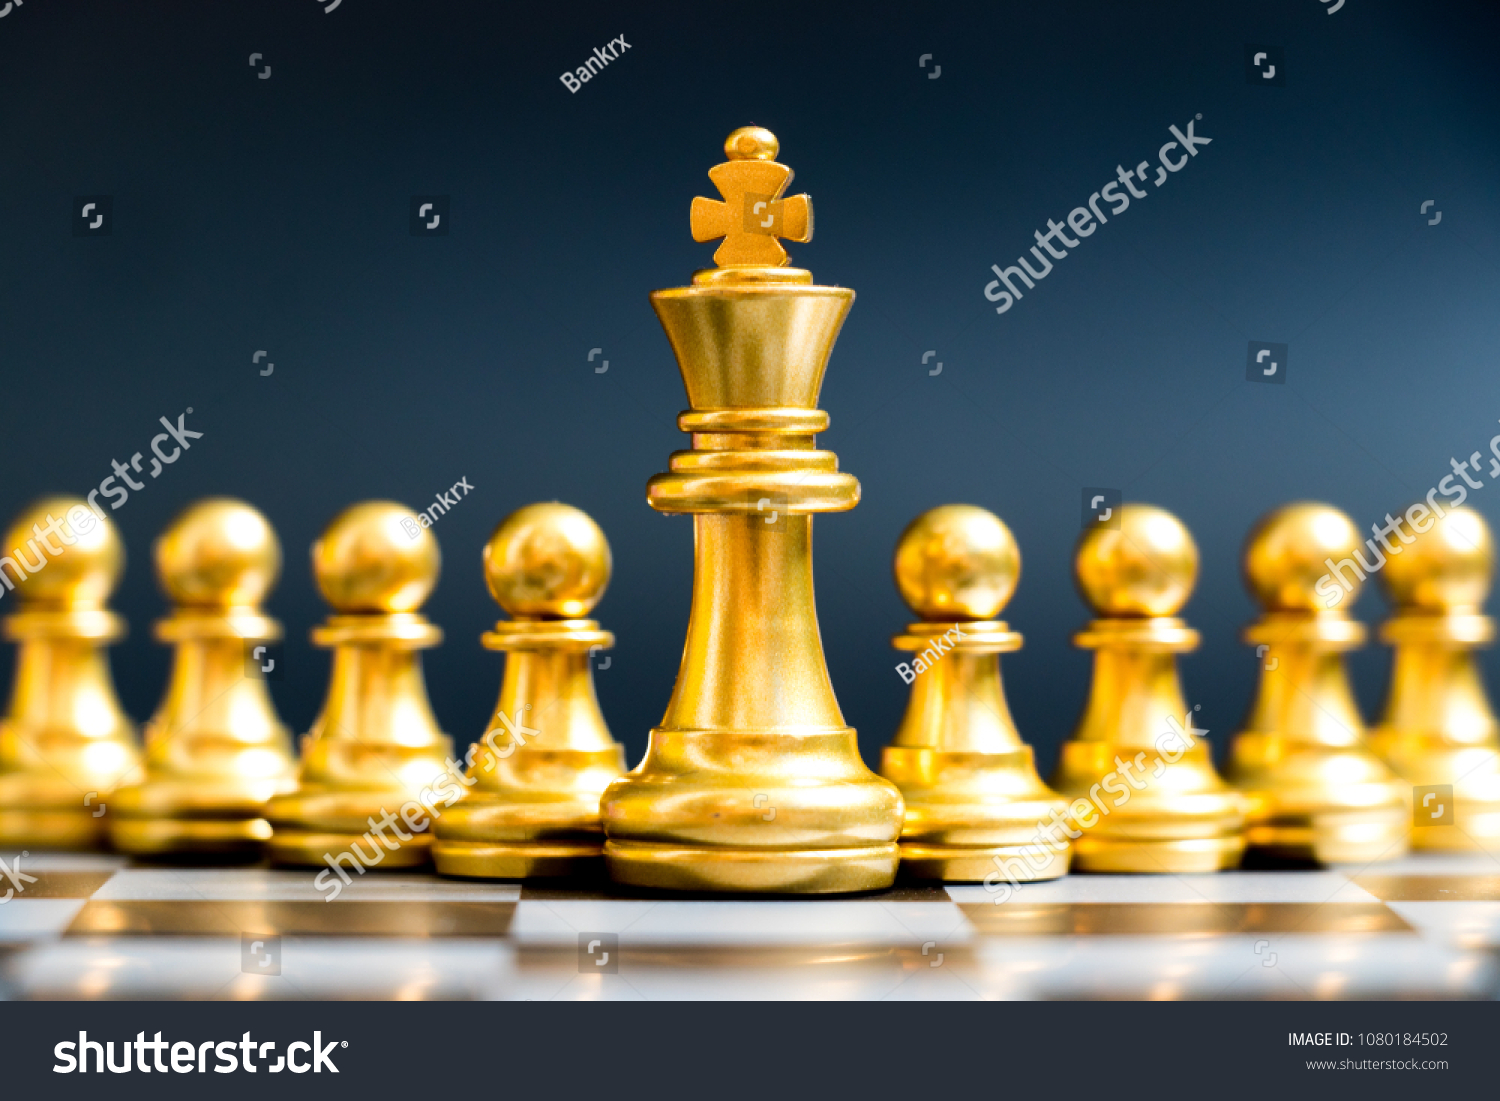 Gold king chess piece stand in front of pawn on black background (Concept of leadership, management) #1080184502